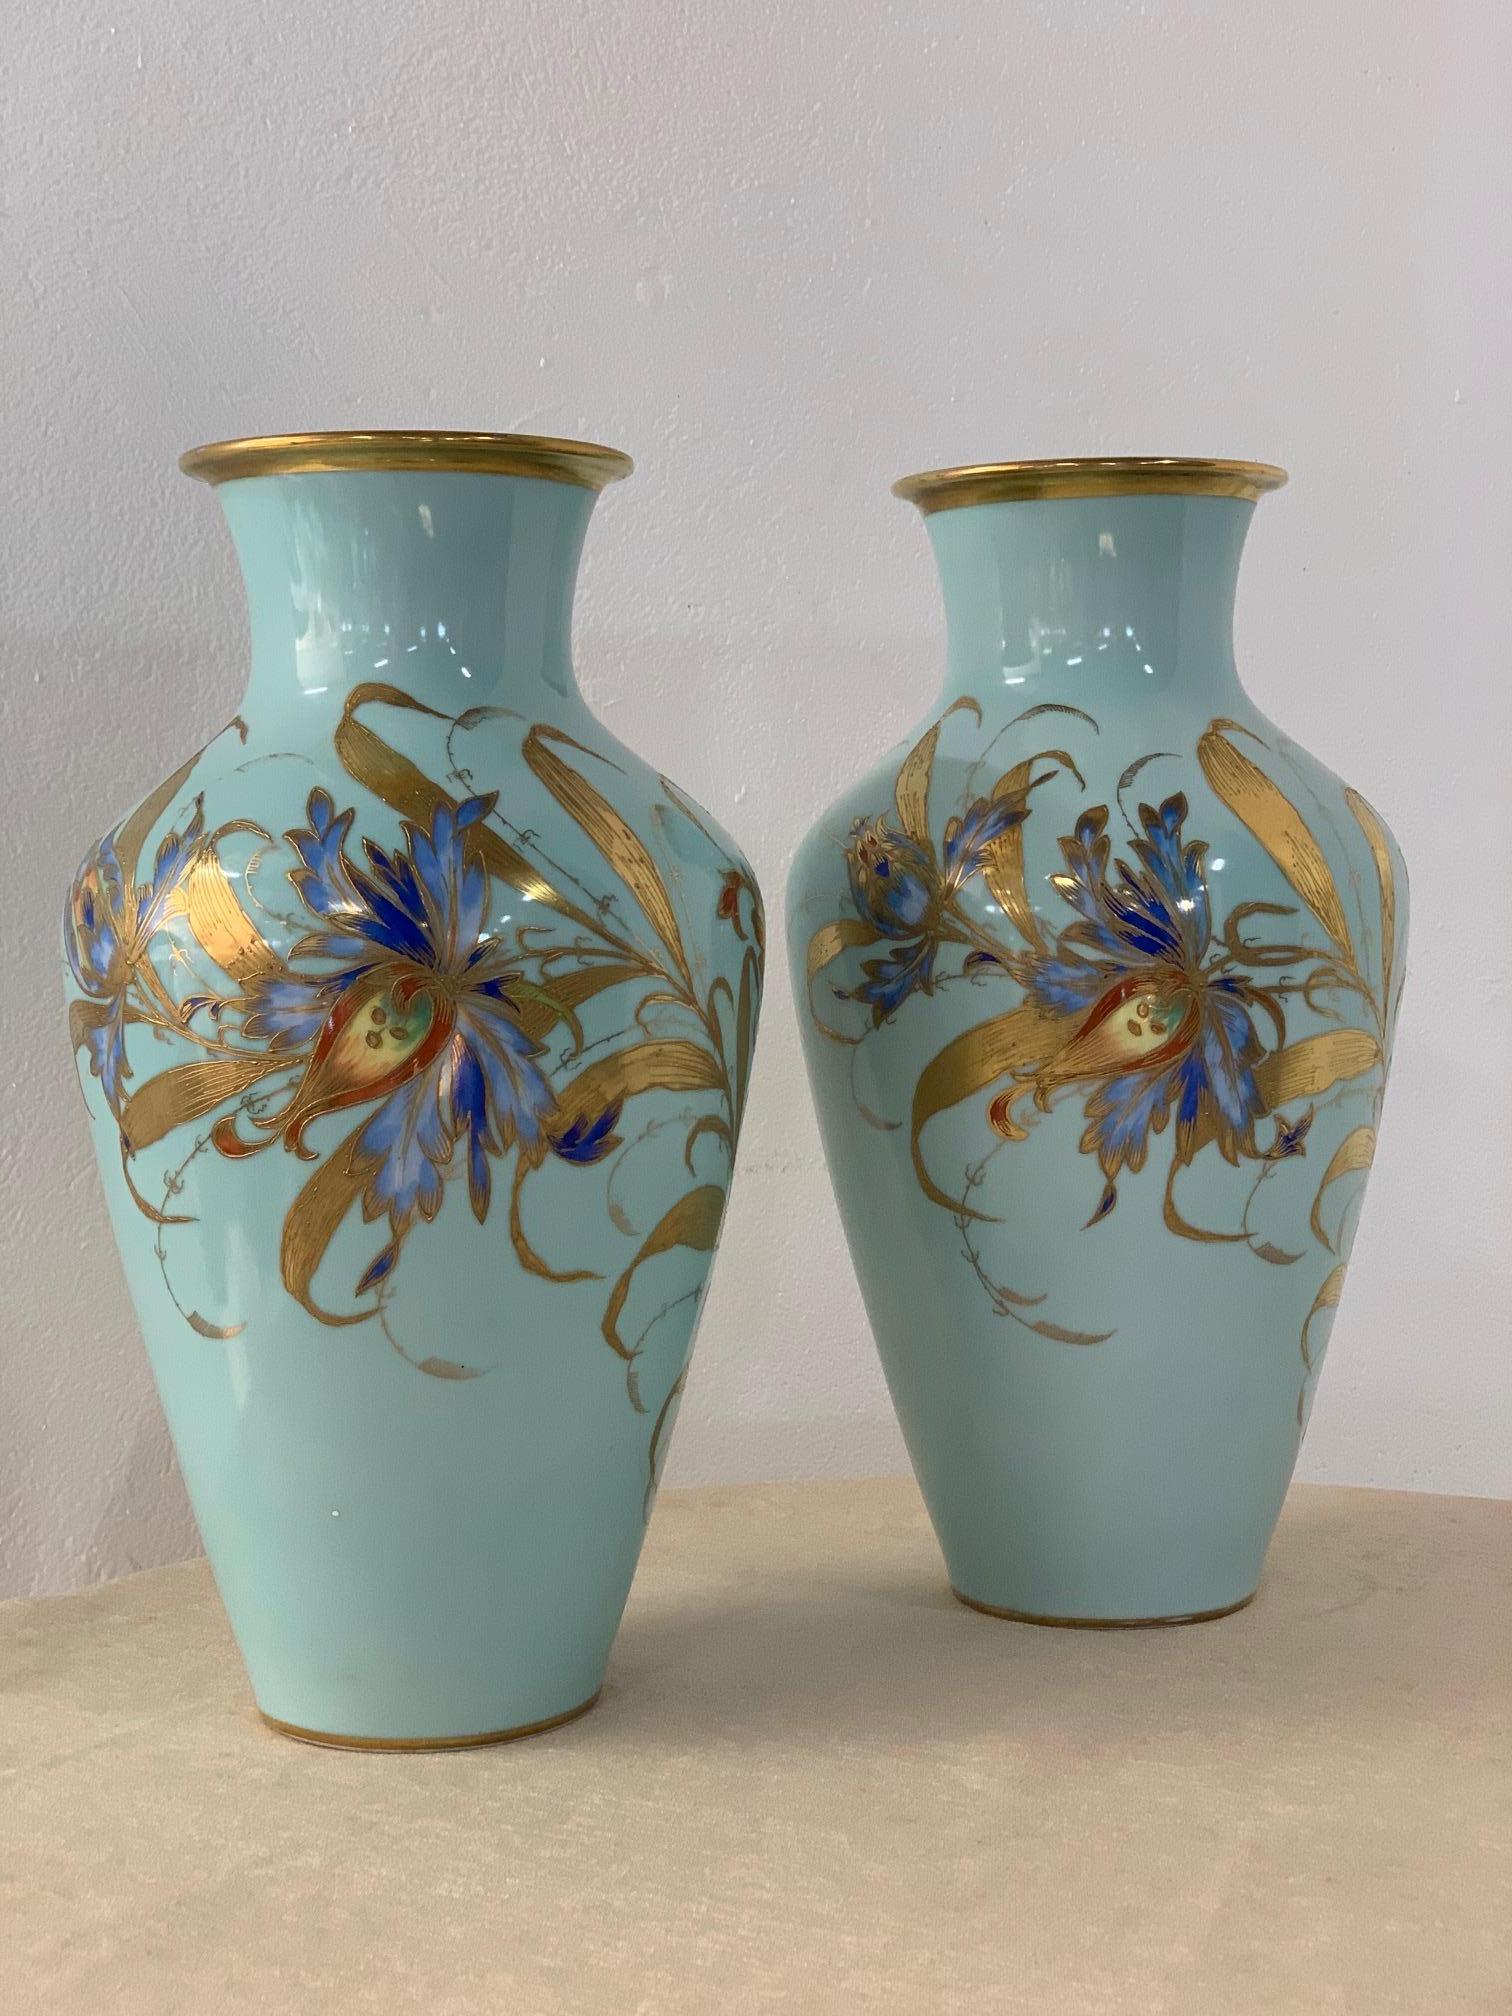 Beautiful pair of ceramic drilled vases with a floral hand painted pattern. Some of the leaves are gold gild with a really vibrant floral pattern. Made in West Germany.
Measures: 17 height body of vases (at its widest) 10